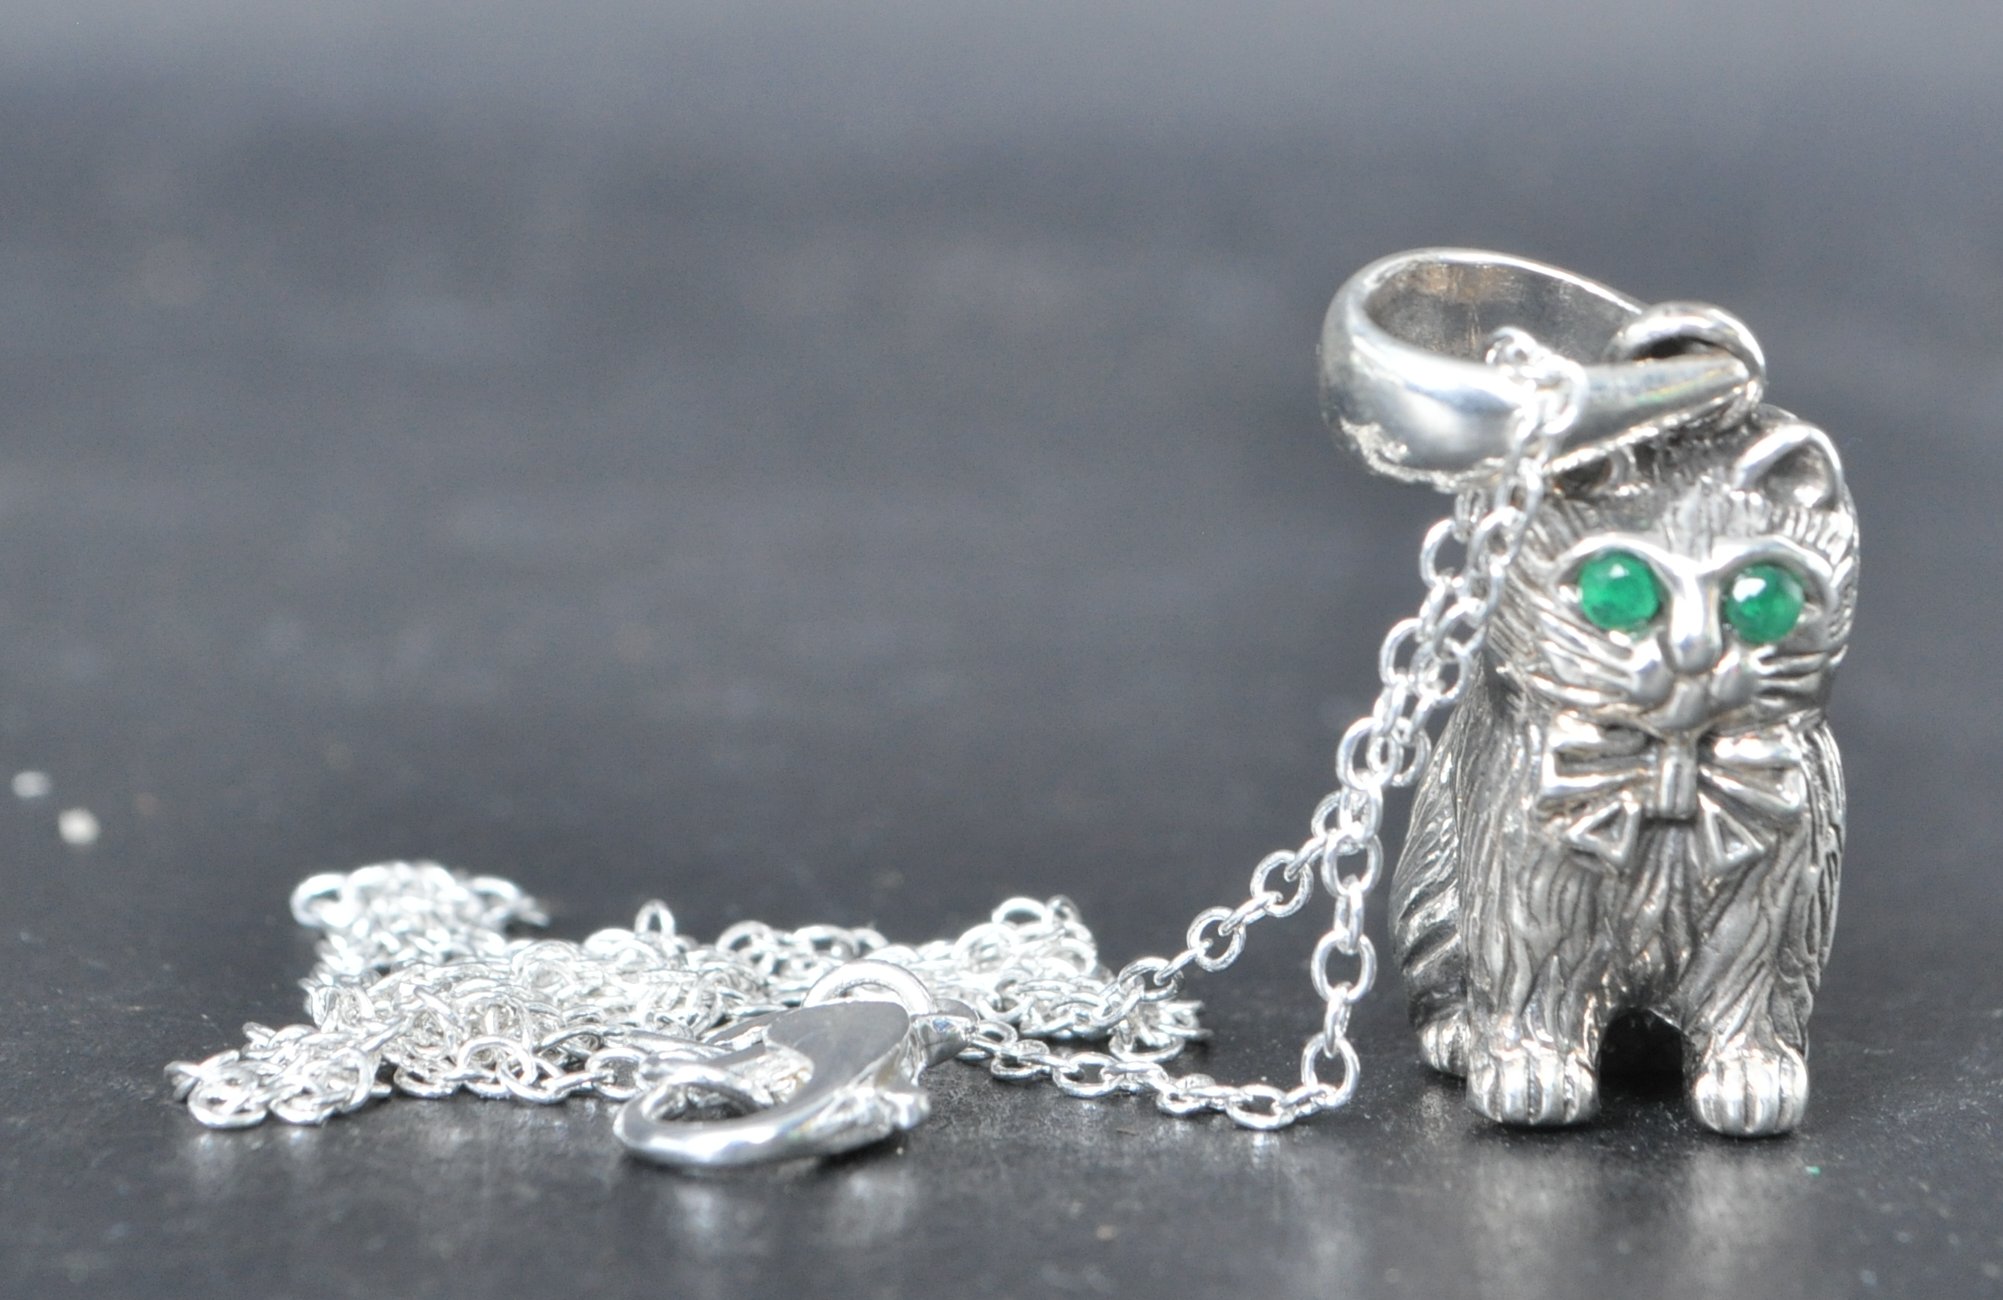 SILVER WHISTLE PENDANT IN THE FORM OF A CAT - Image 2 of 5